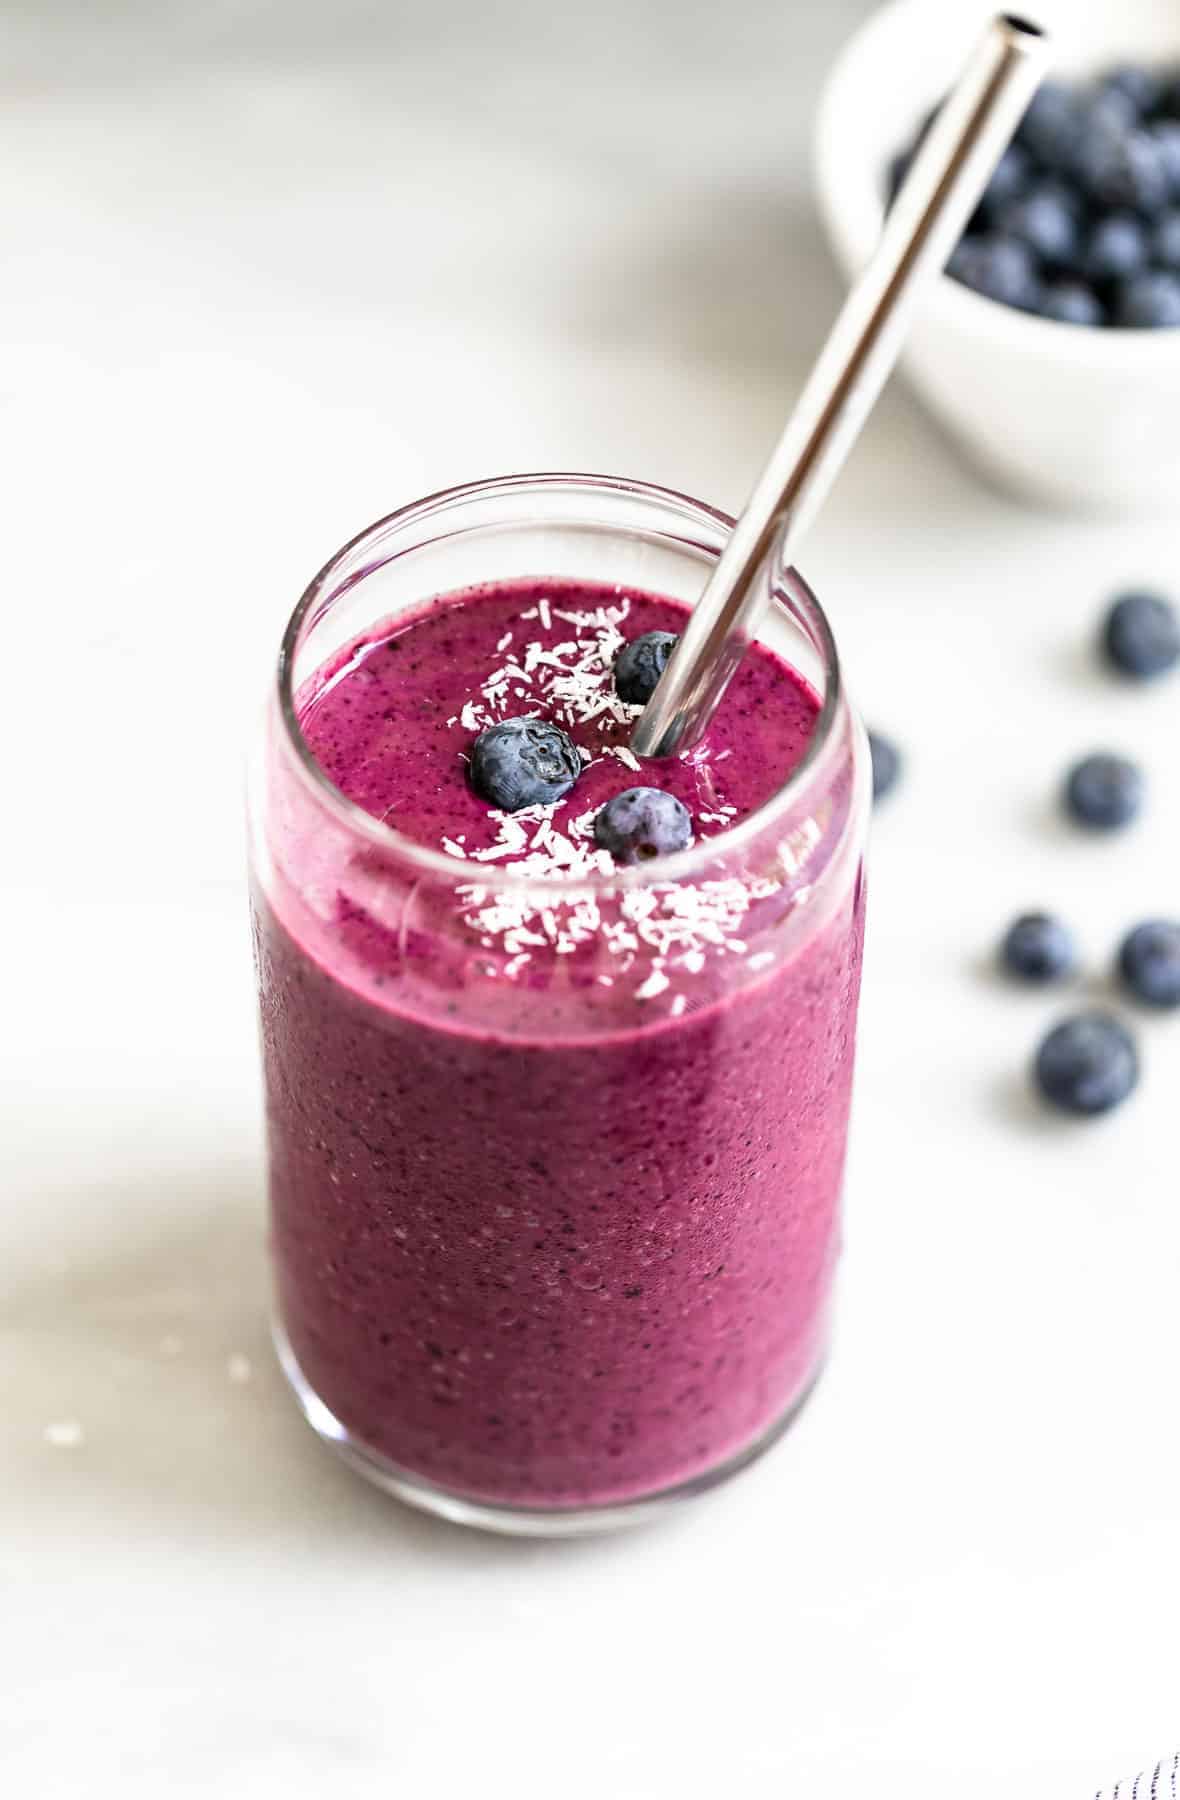 one glass with the smoothie and blueberries